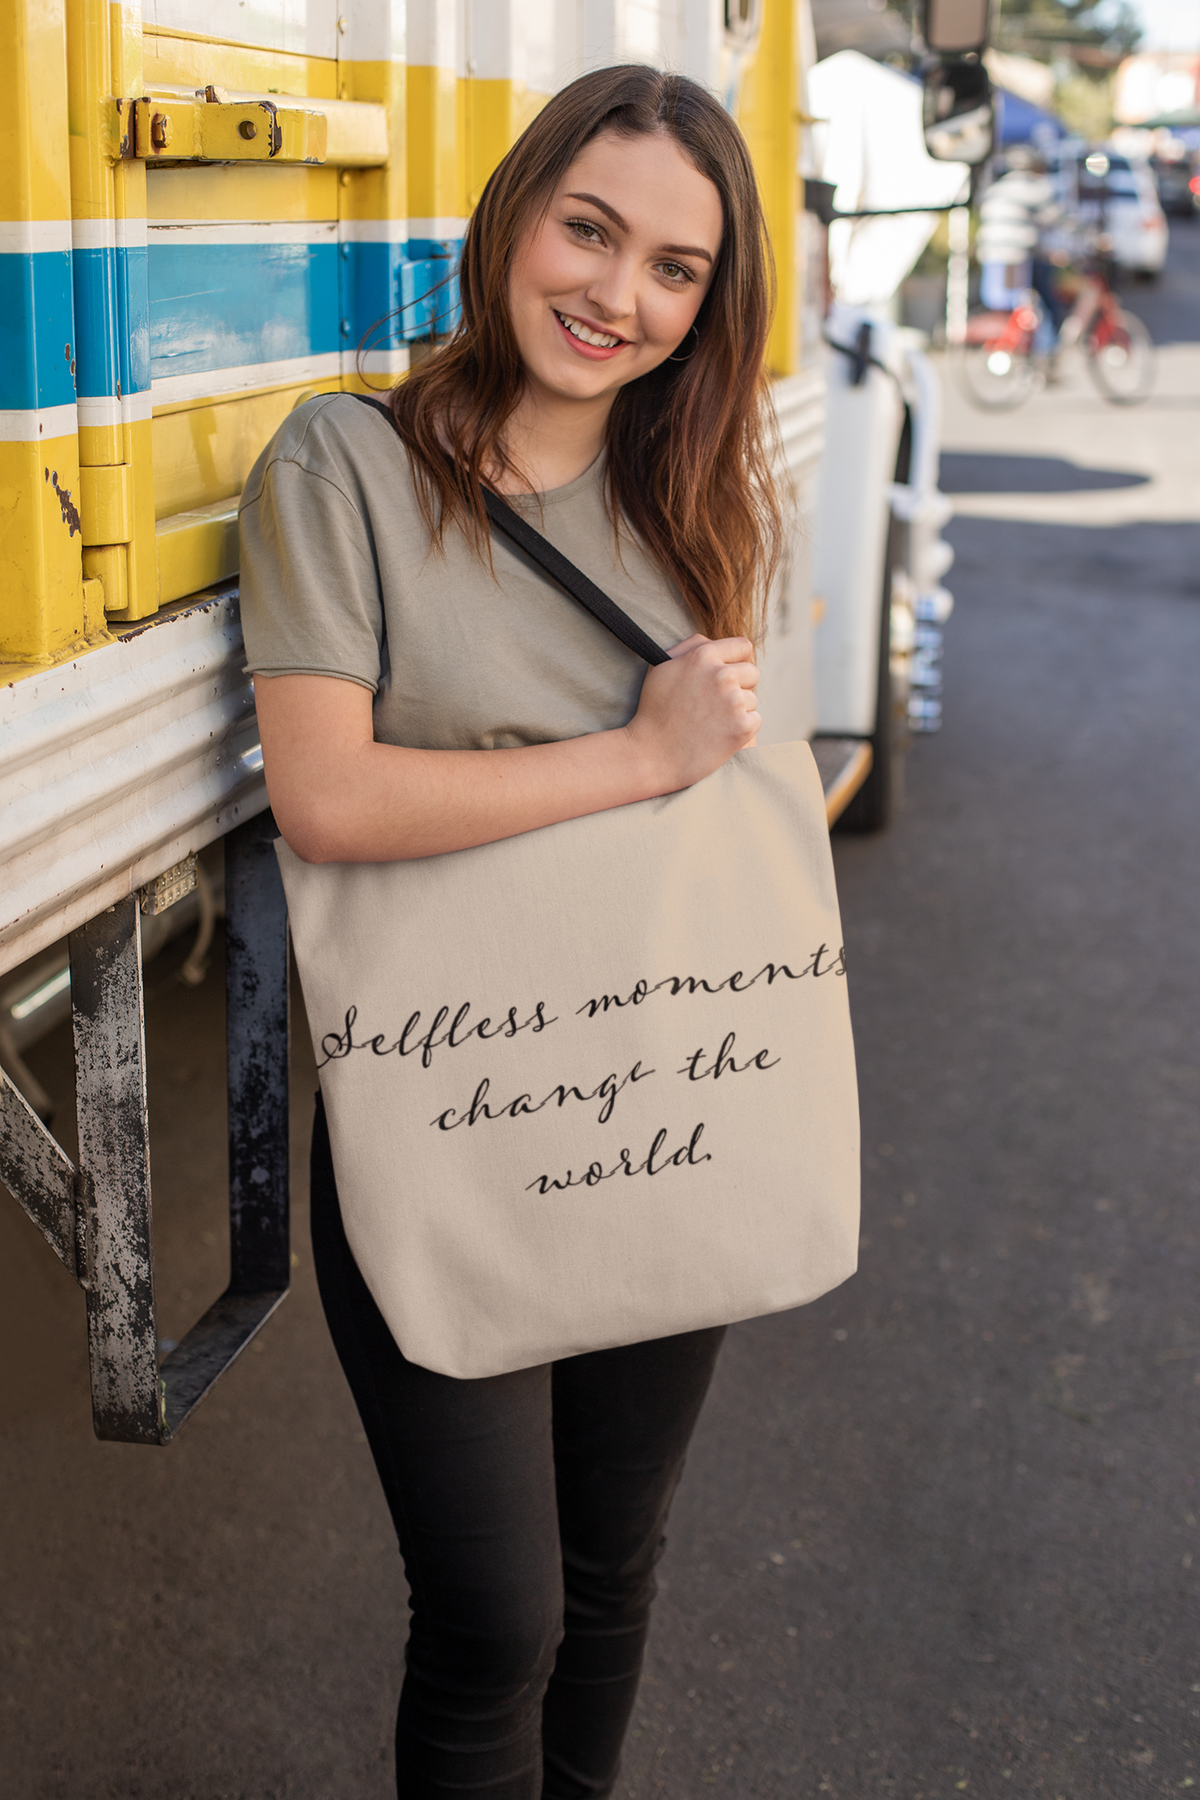 Tote Bag - Vintage- Selfless Moments Change the World Bags (3157075296356)